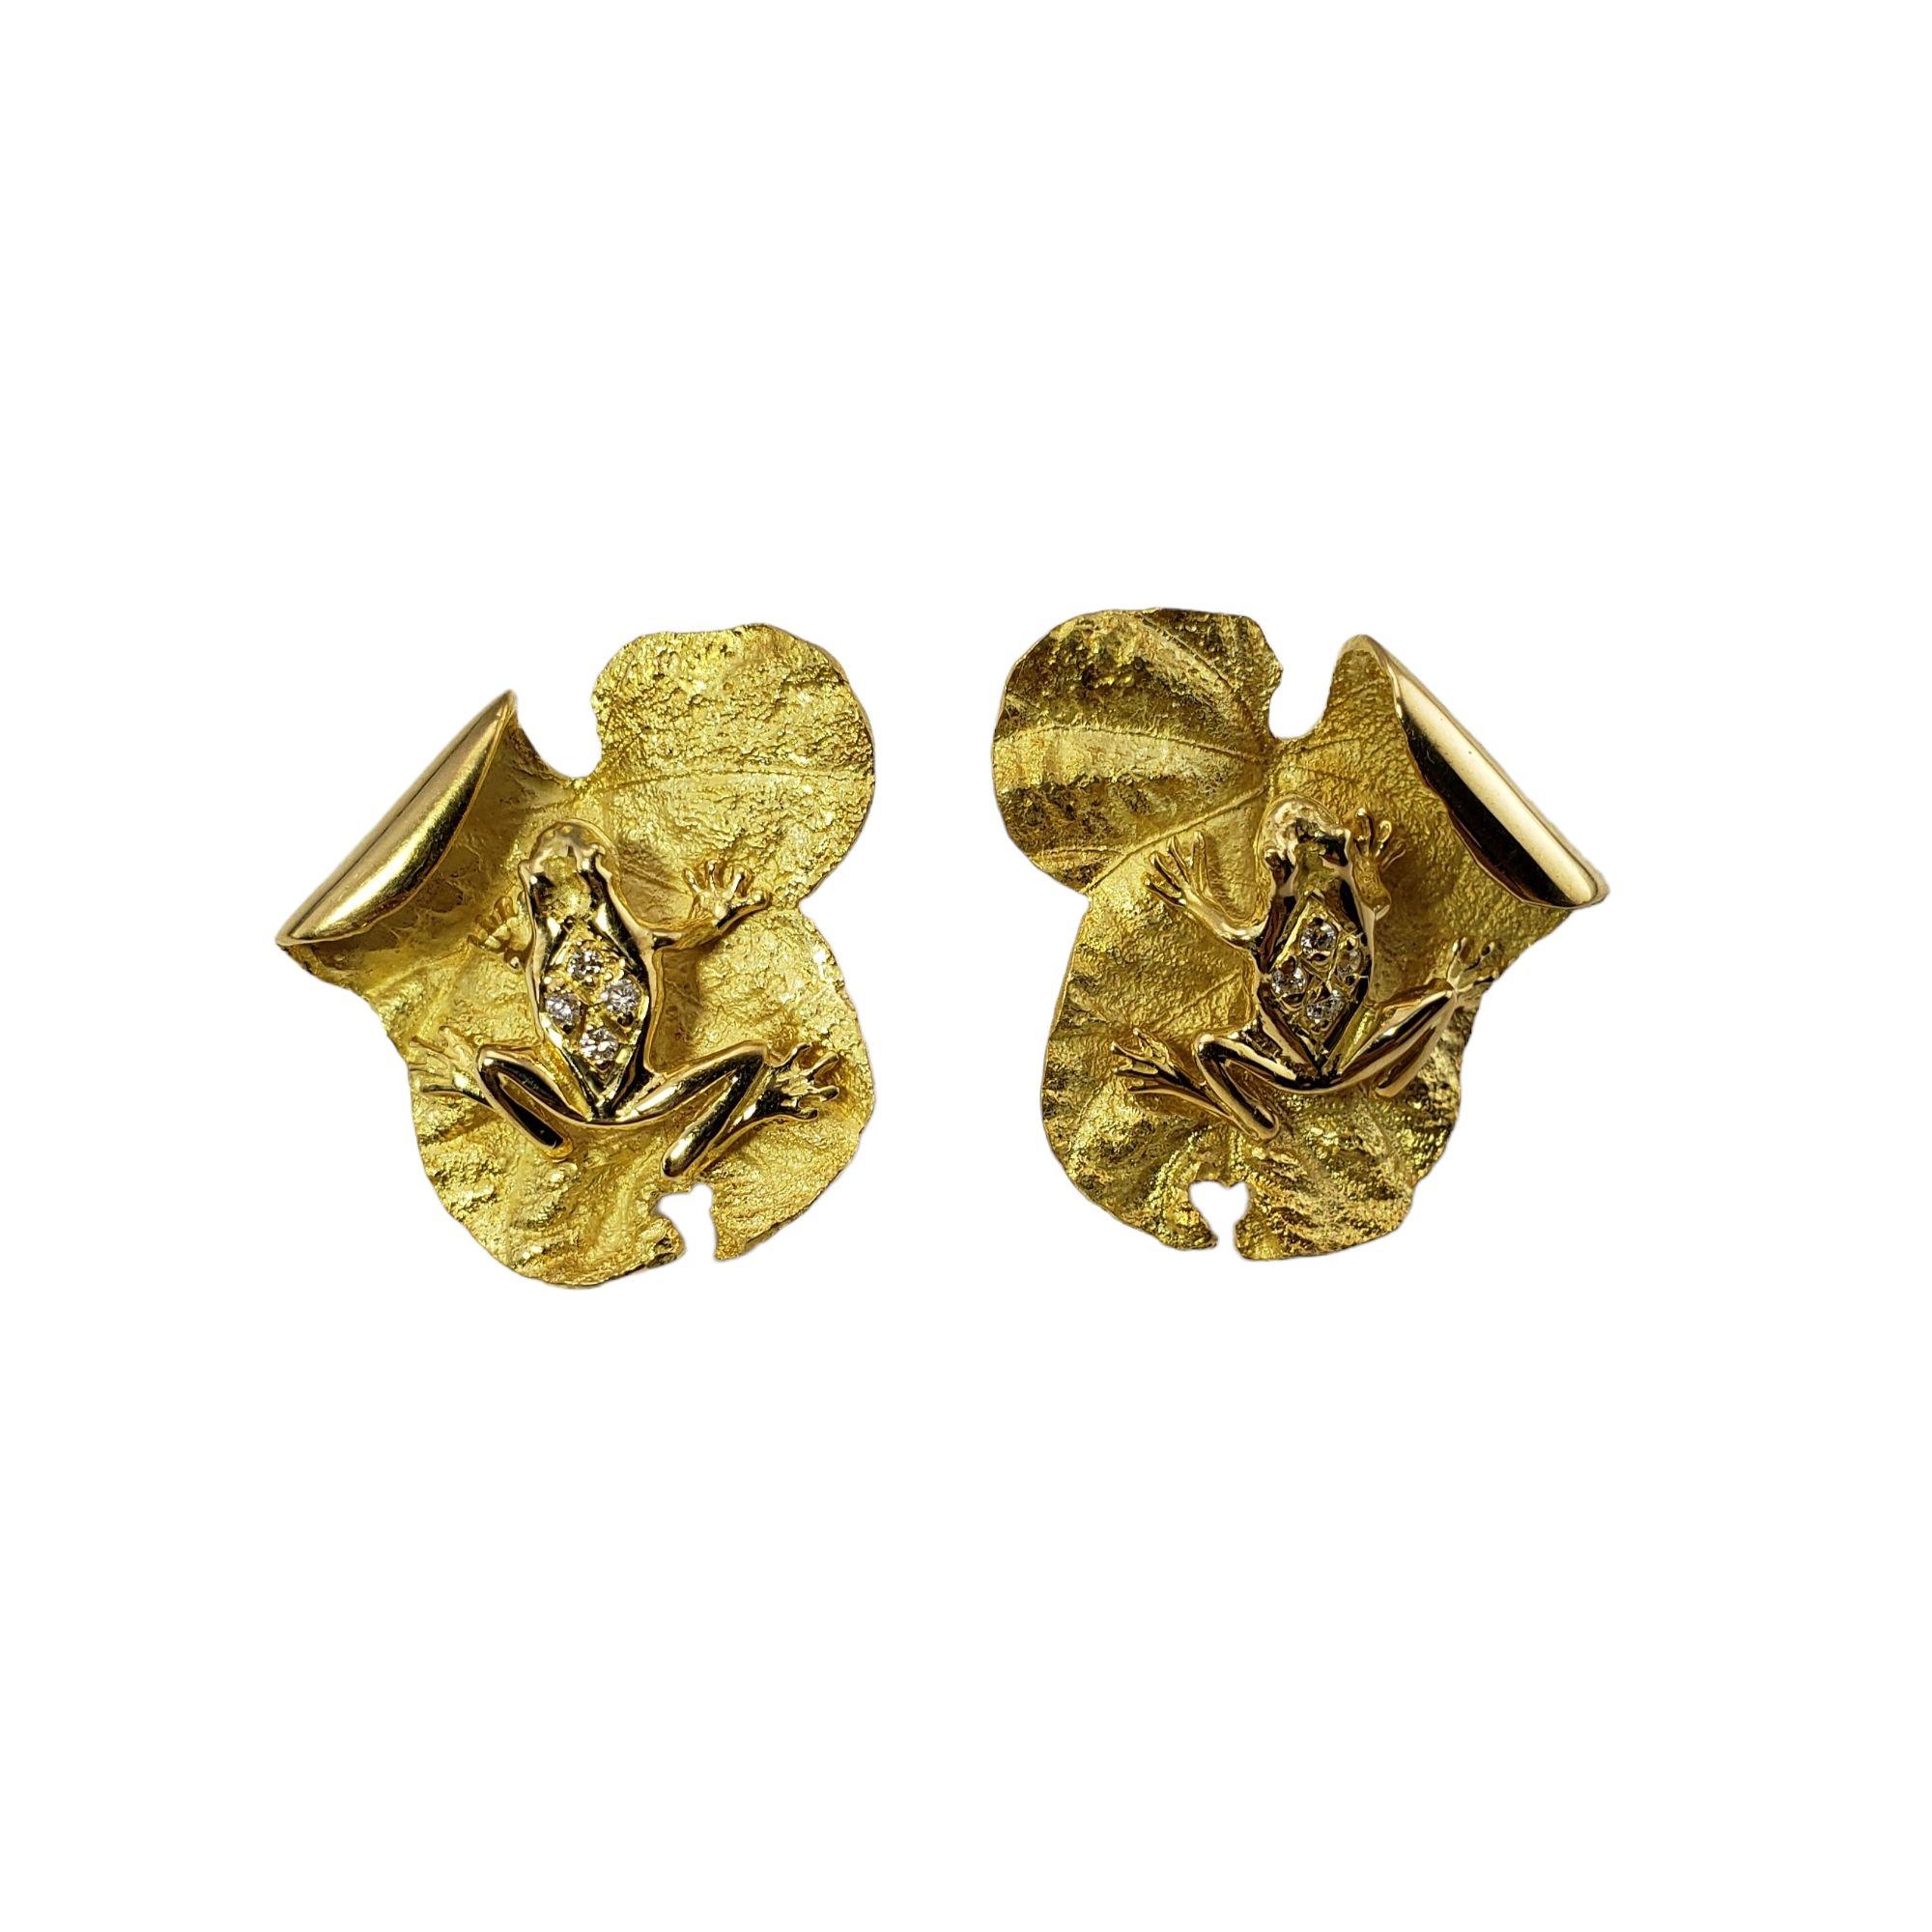 Vintage 18 Karat Yellow Gold and Diamond Lily Pad with Frog Earrings-

These lovely earrings each feature a frog sitting atop its lily pad. Accented with four round brilliant cut diamonds set in beautifully detailed 18K yellow gold. Omega back